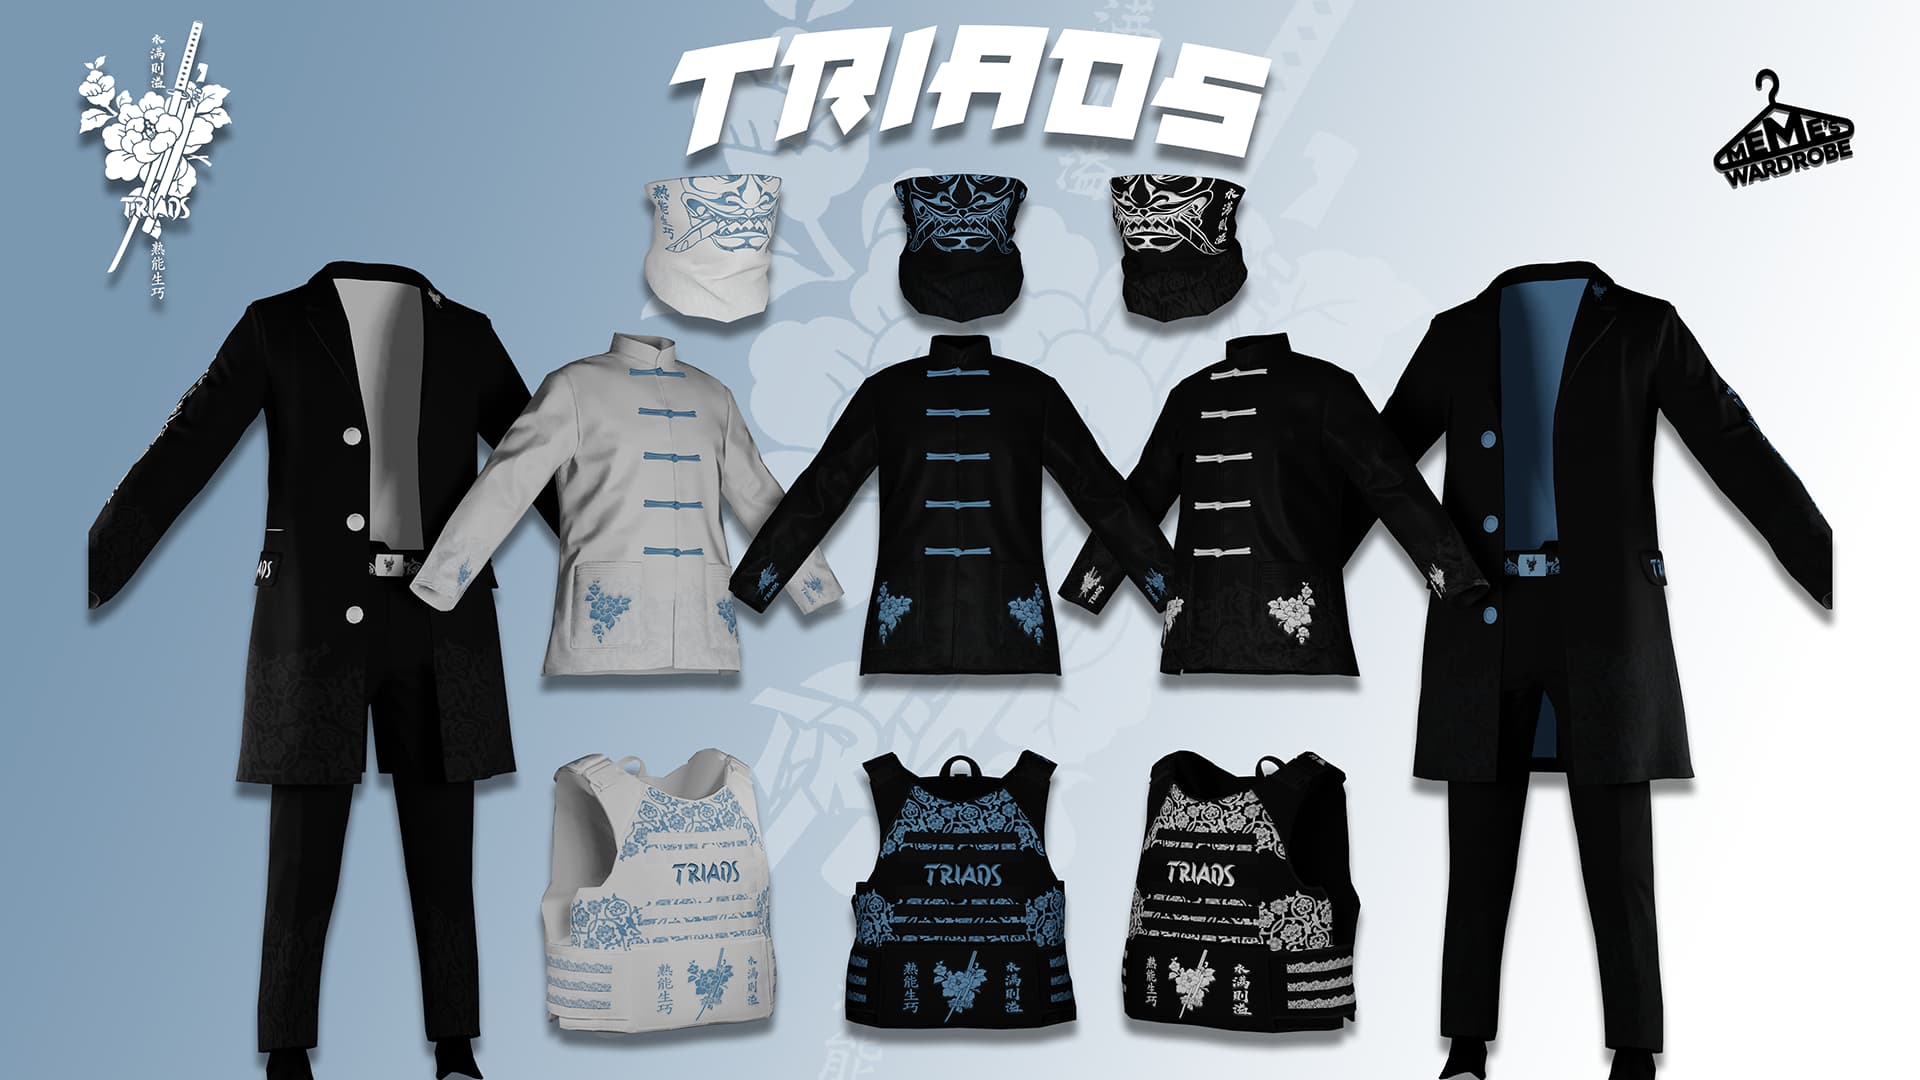 [PAID] Triad's Gang Clothing Package! - Releases - Cfx.re Community